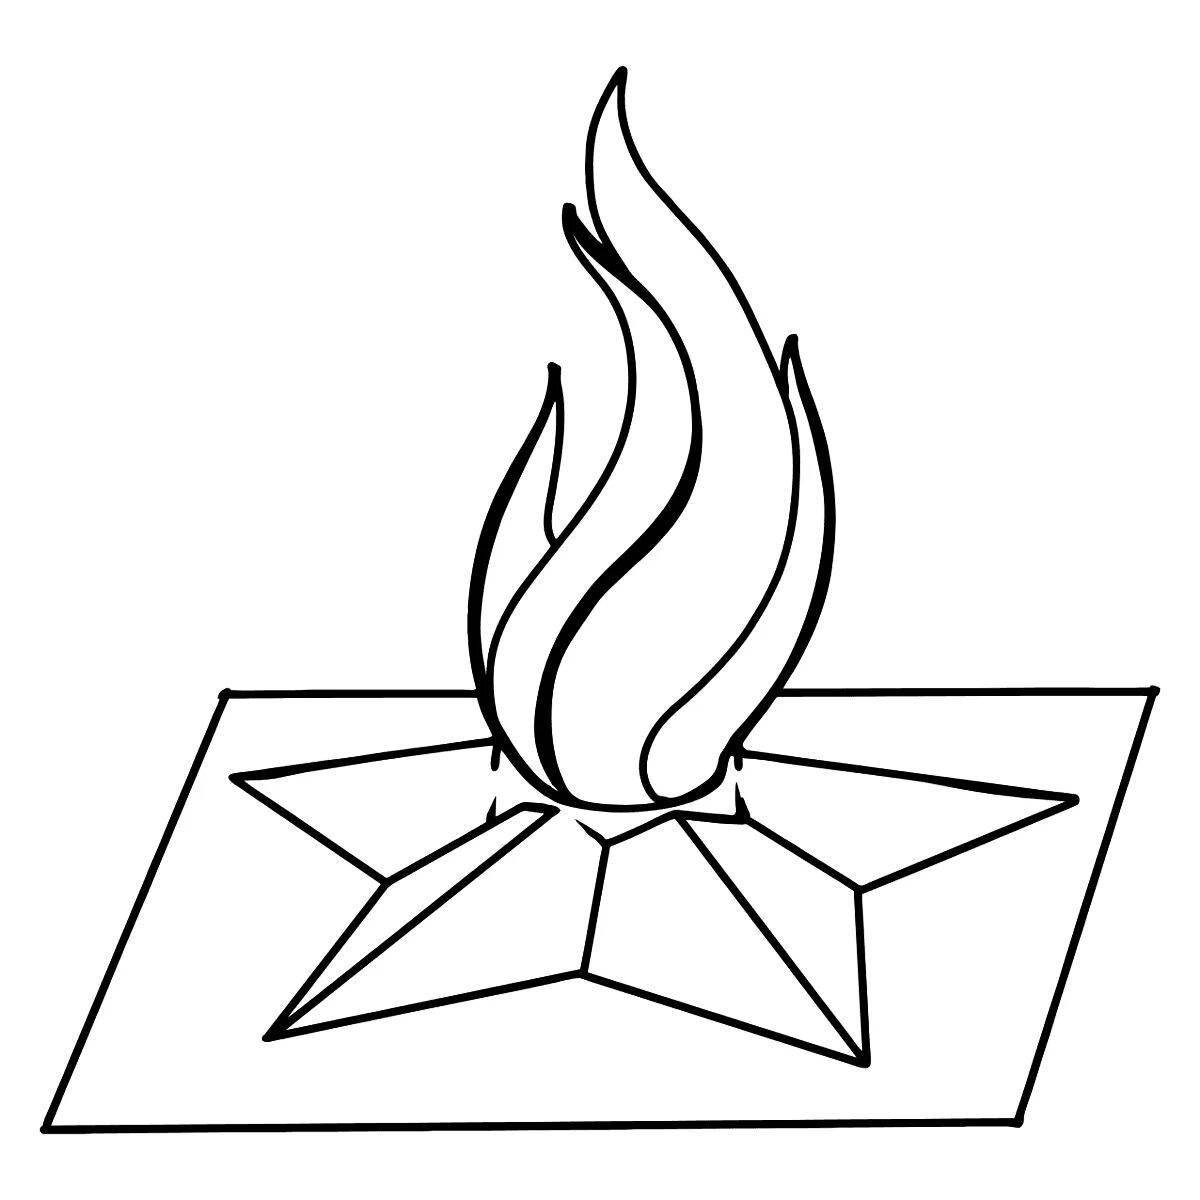 Flame coloring page for kids